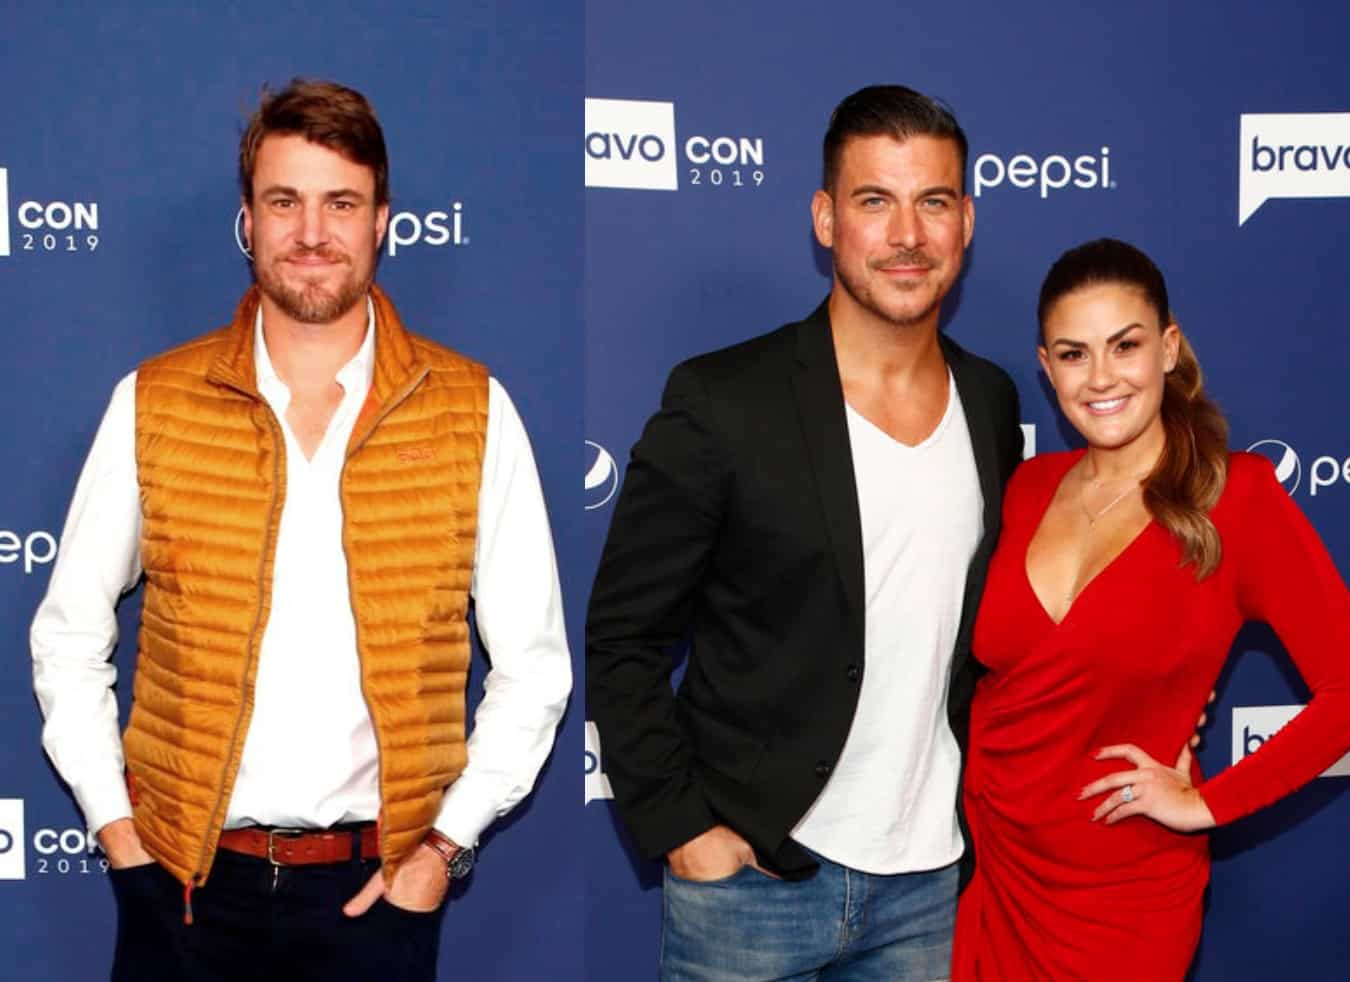 Southern Charm's Shep Rose Responds to Being Called "The Worst Wedding Guest Ever" by Vanderpump Rules' Jax Taylor, See His Tweet